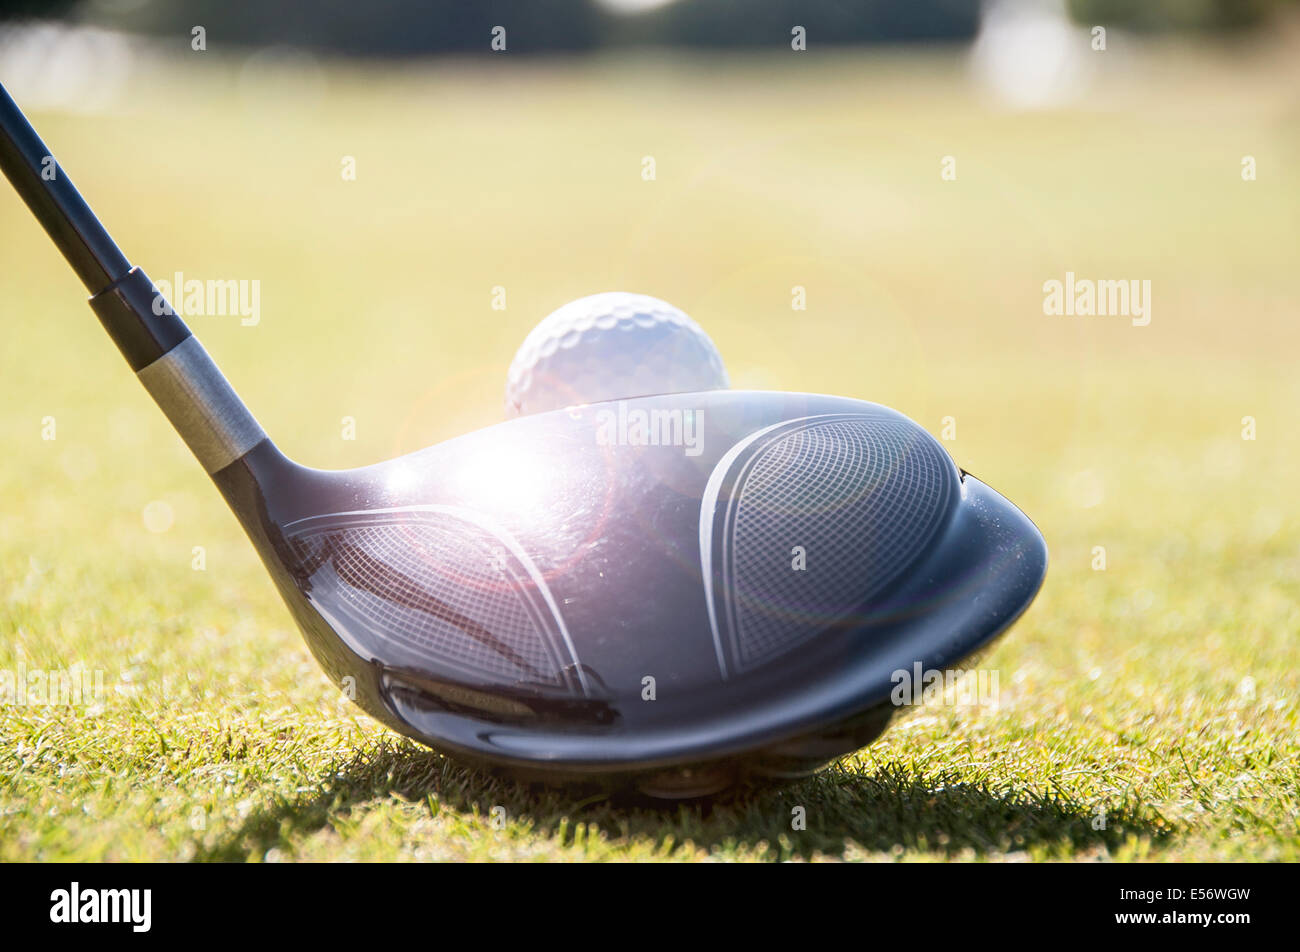 Golfer lining up a driver golf club on the tee, ready to hit the white golf ball. Stock Photo